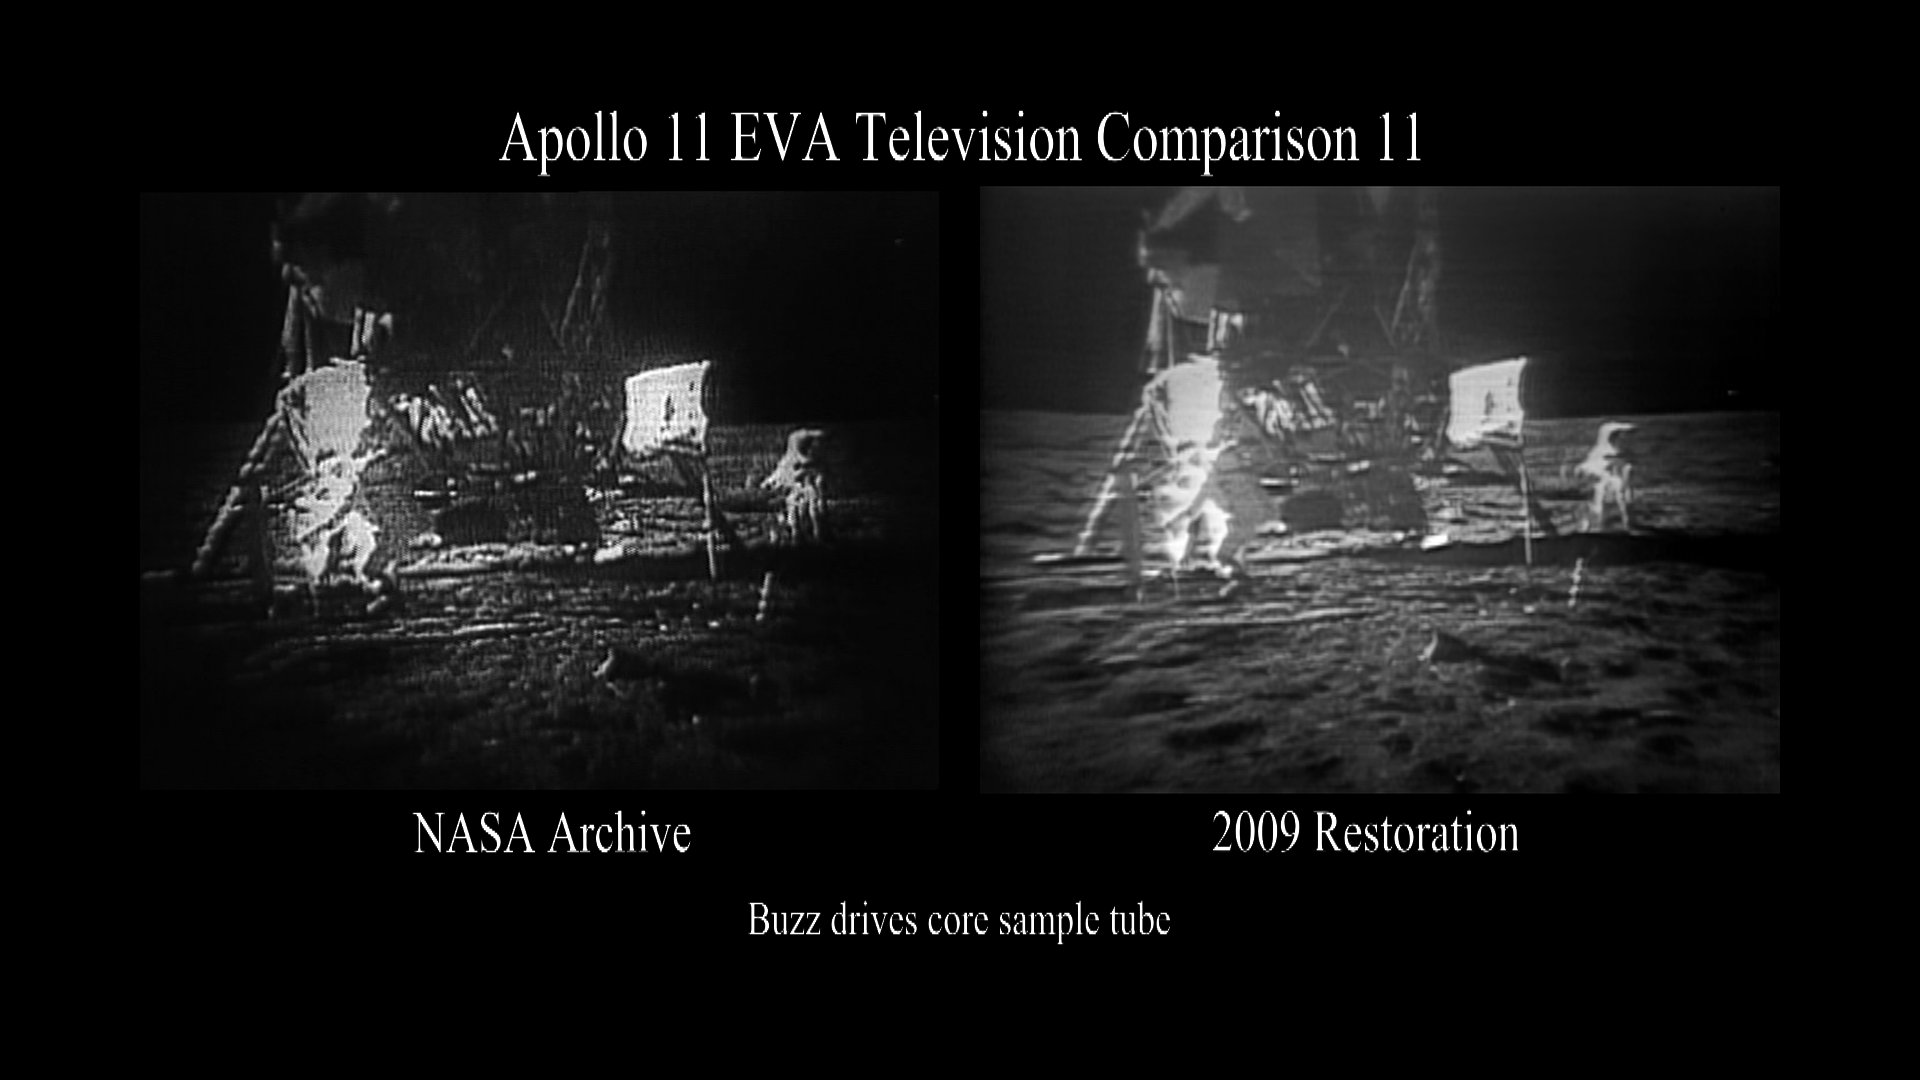 A side by side comparison of the original broadcast video and partially restored video of Buzz Aldrin hammering a core sample tube into the moon's surface.